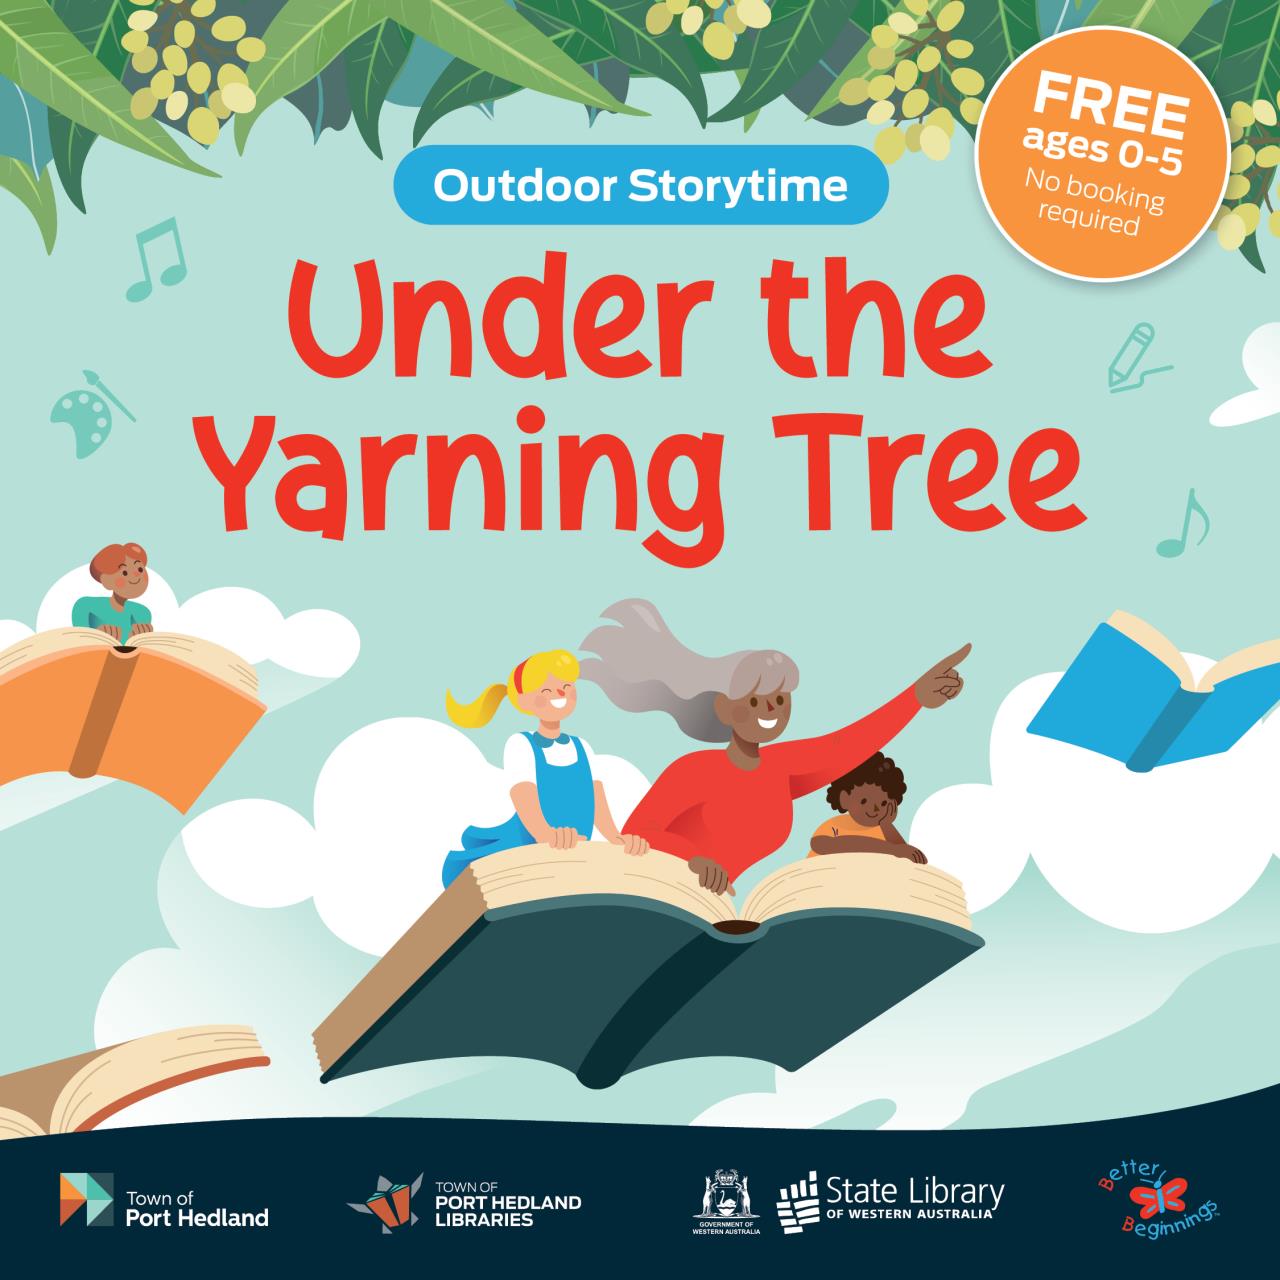 Outdoor Storytime, Under the Yarning Tree